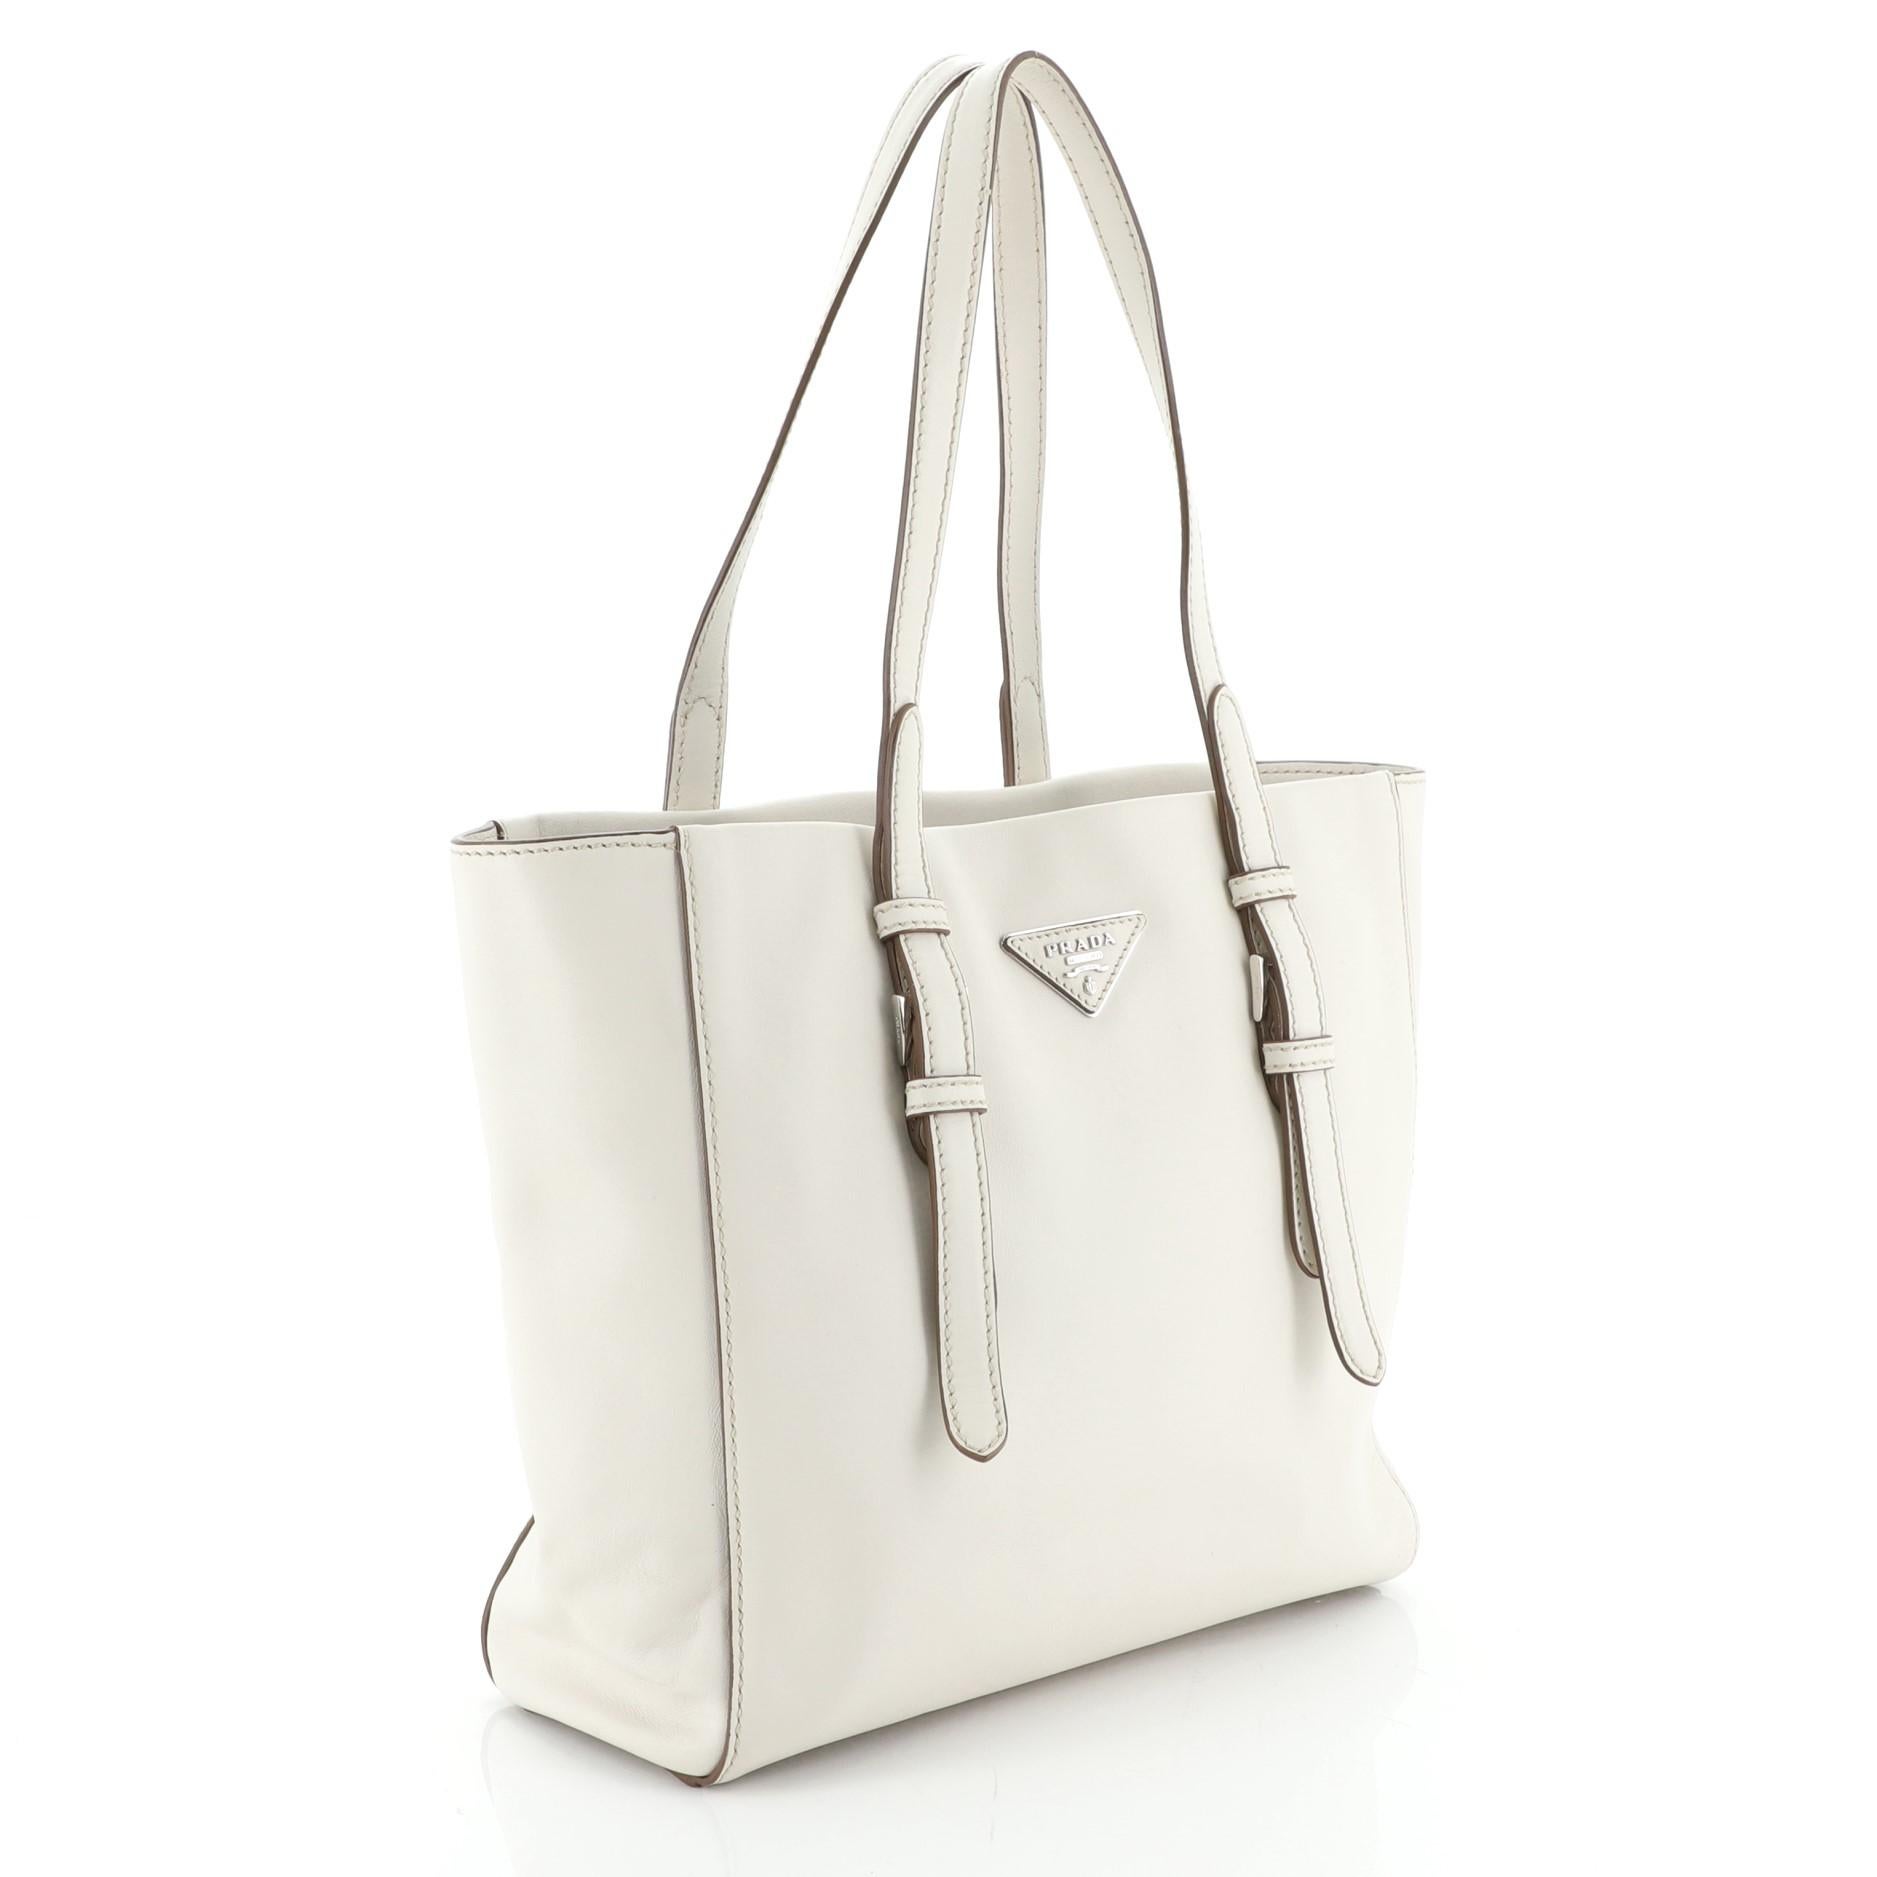 This Prada Belted Tote Soft Calfskin Medium, crafted from white soft calfskin leather, features dual tall flat handles with belt details, raised Prada logo, and silver-tone hardware. Its zip closure opens to a brown fabric interior with zip and slip